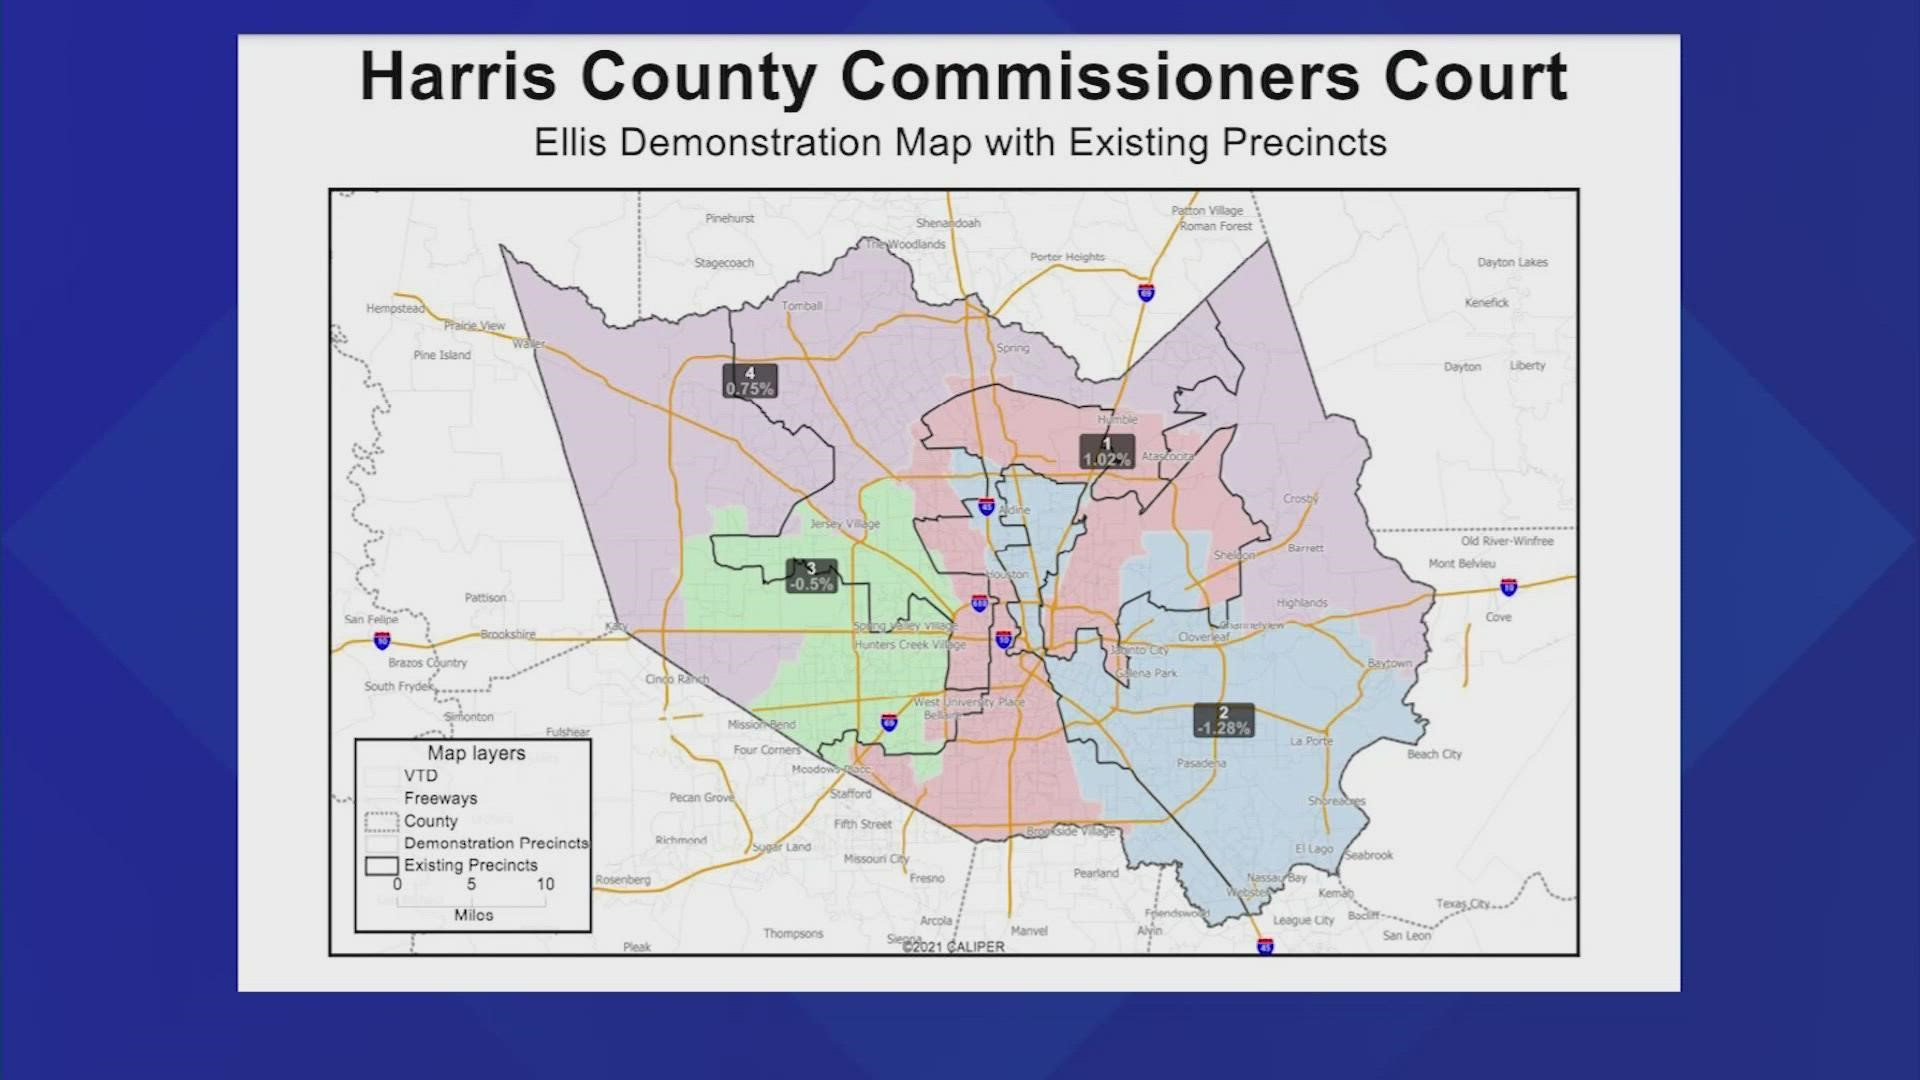 Harris County Judge Lina Hidalgo is asking for public input on redistricting maps after commissioners and the community give opposition to what has been proposed.